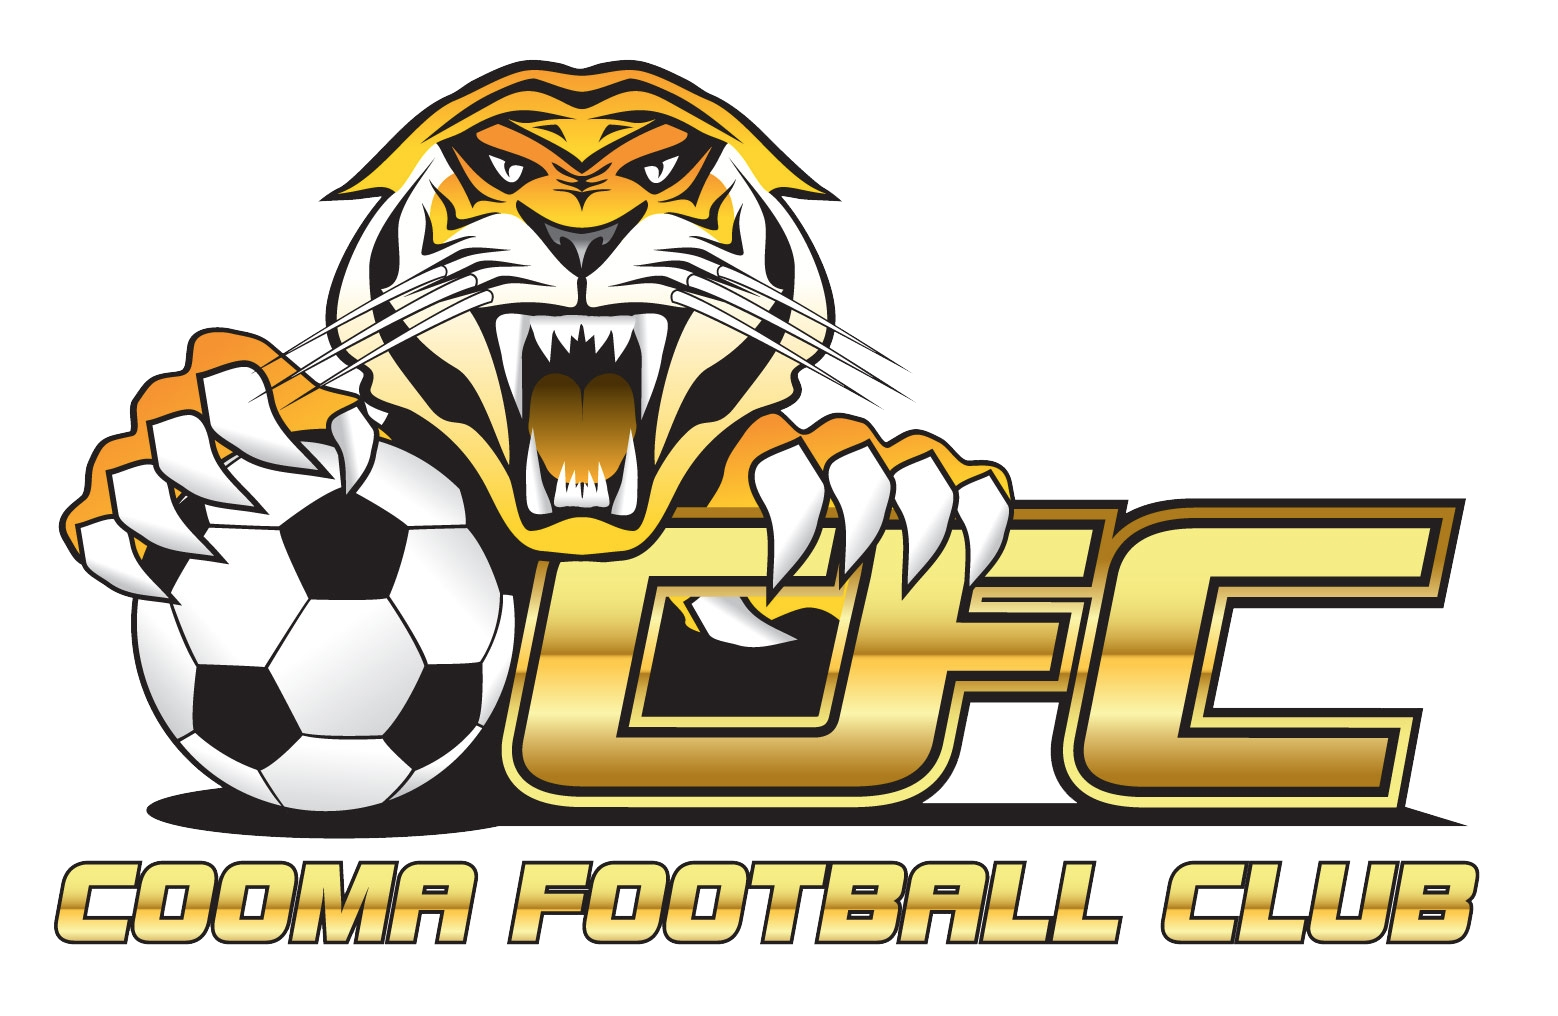 Cooma Tigers logo